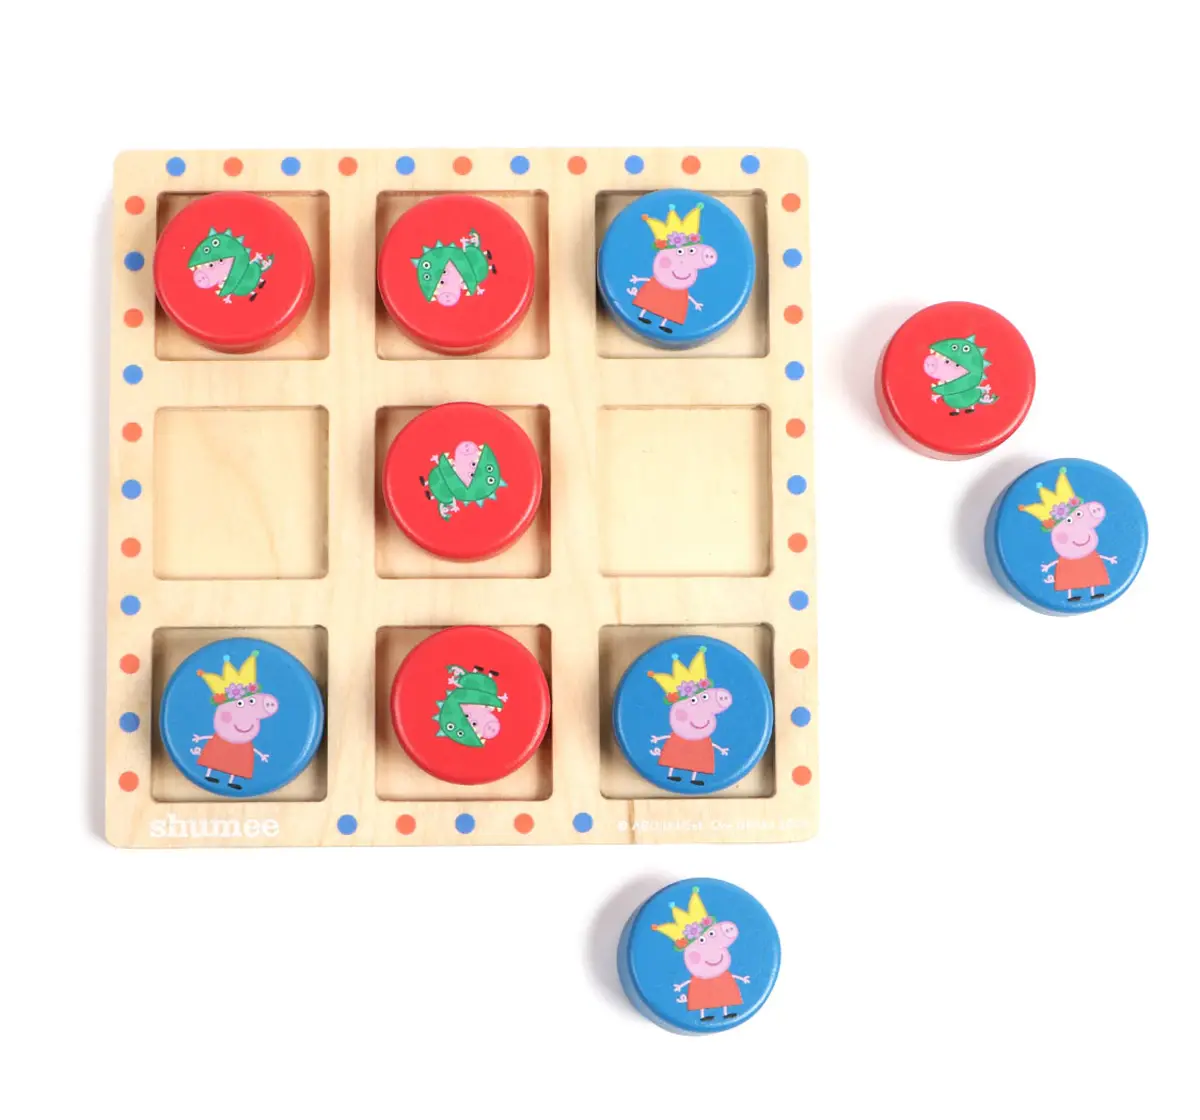 Shumee Peppa and George Tic Tac Toe Game for kids 3Y+, Multicolour